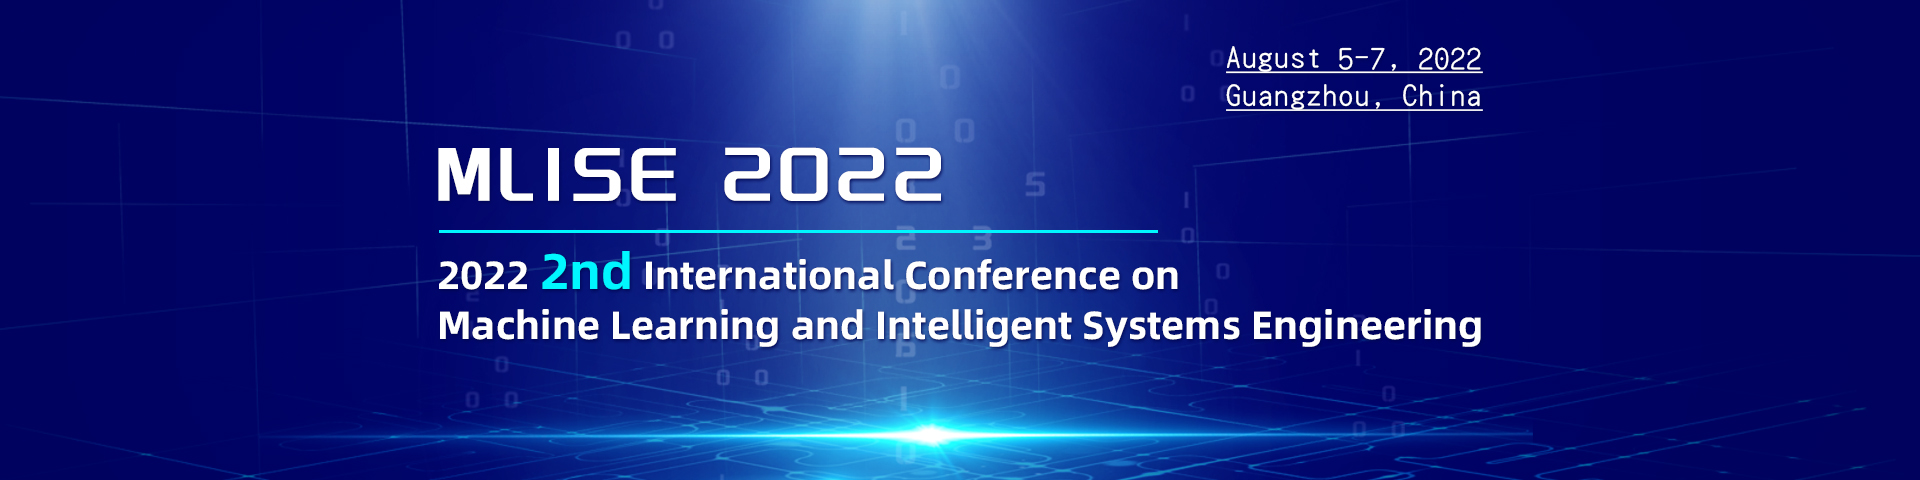 2022 2nd International Conference on Machine Learning and Intelligent Systems Engineering (MLISE 2022), Online Event